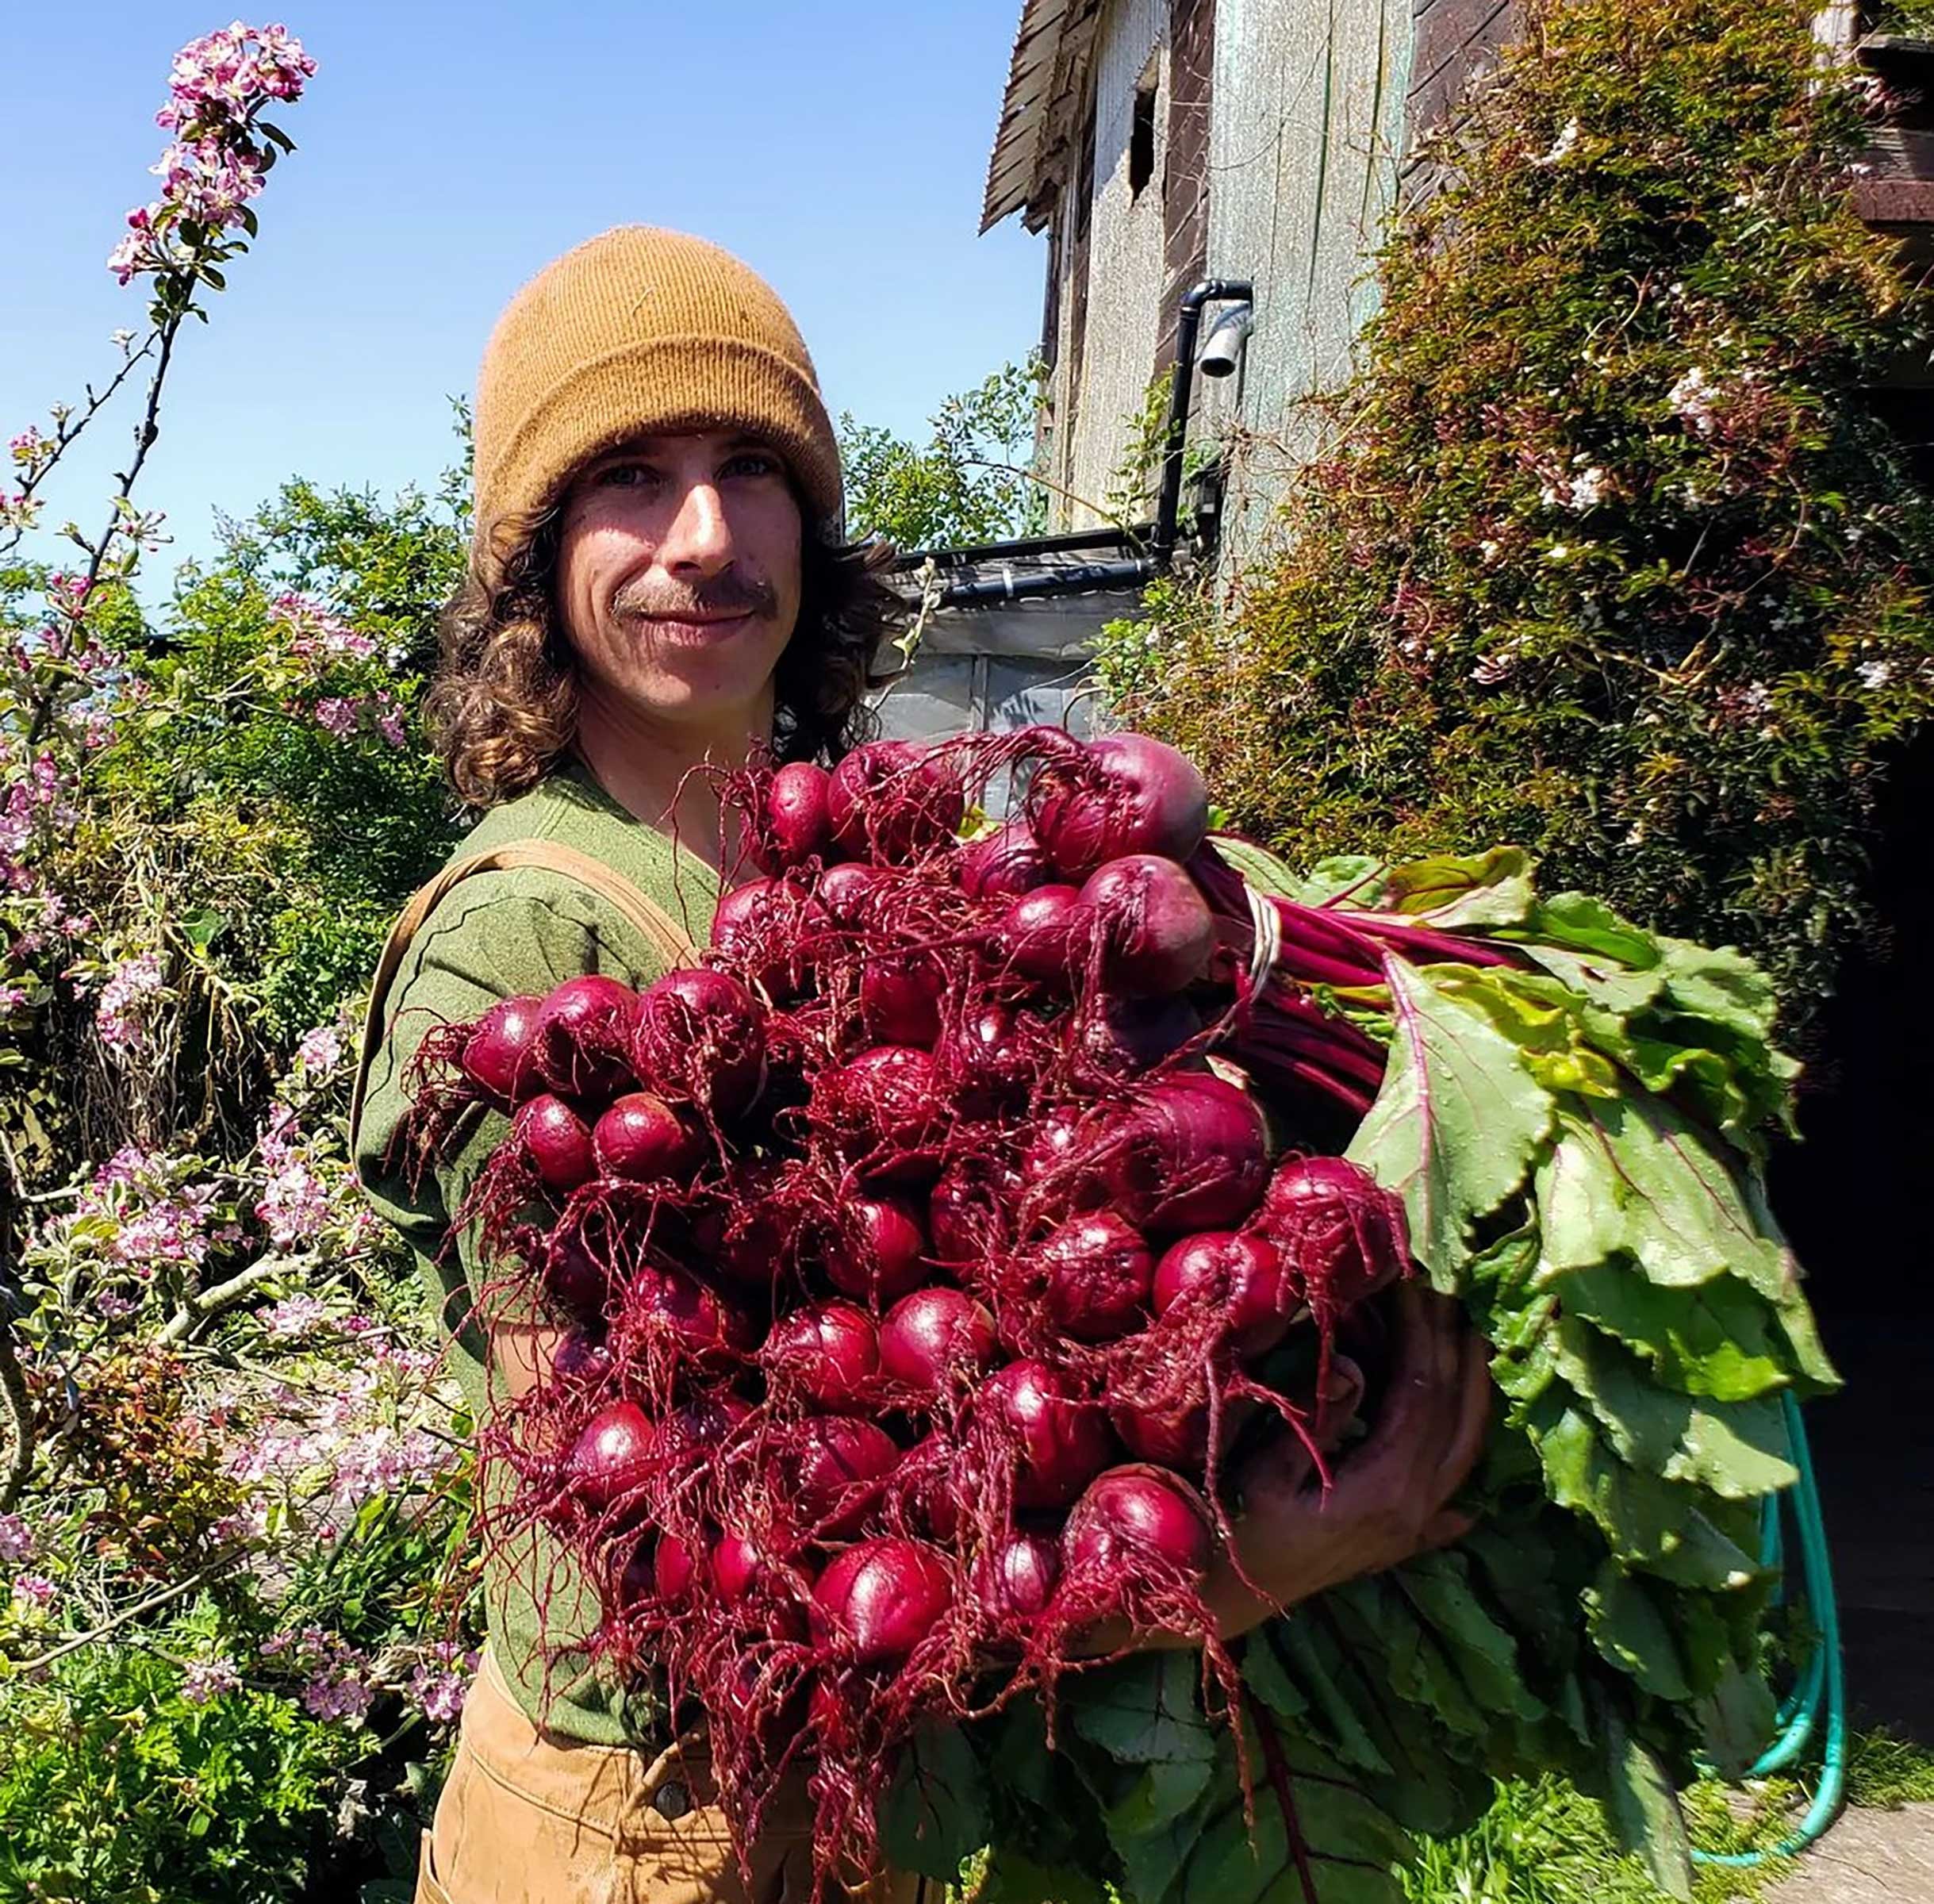 Shea holds a bevy of beets.